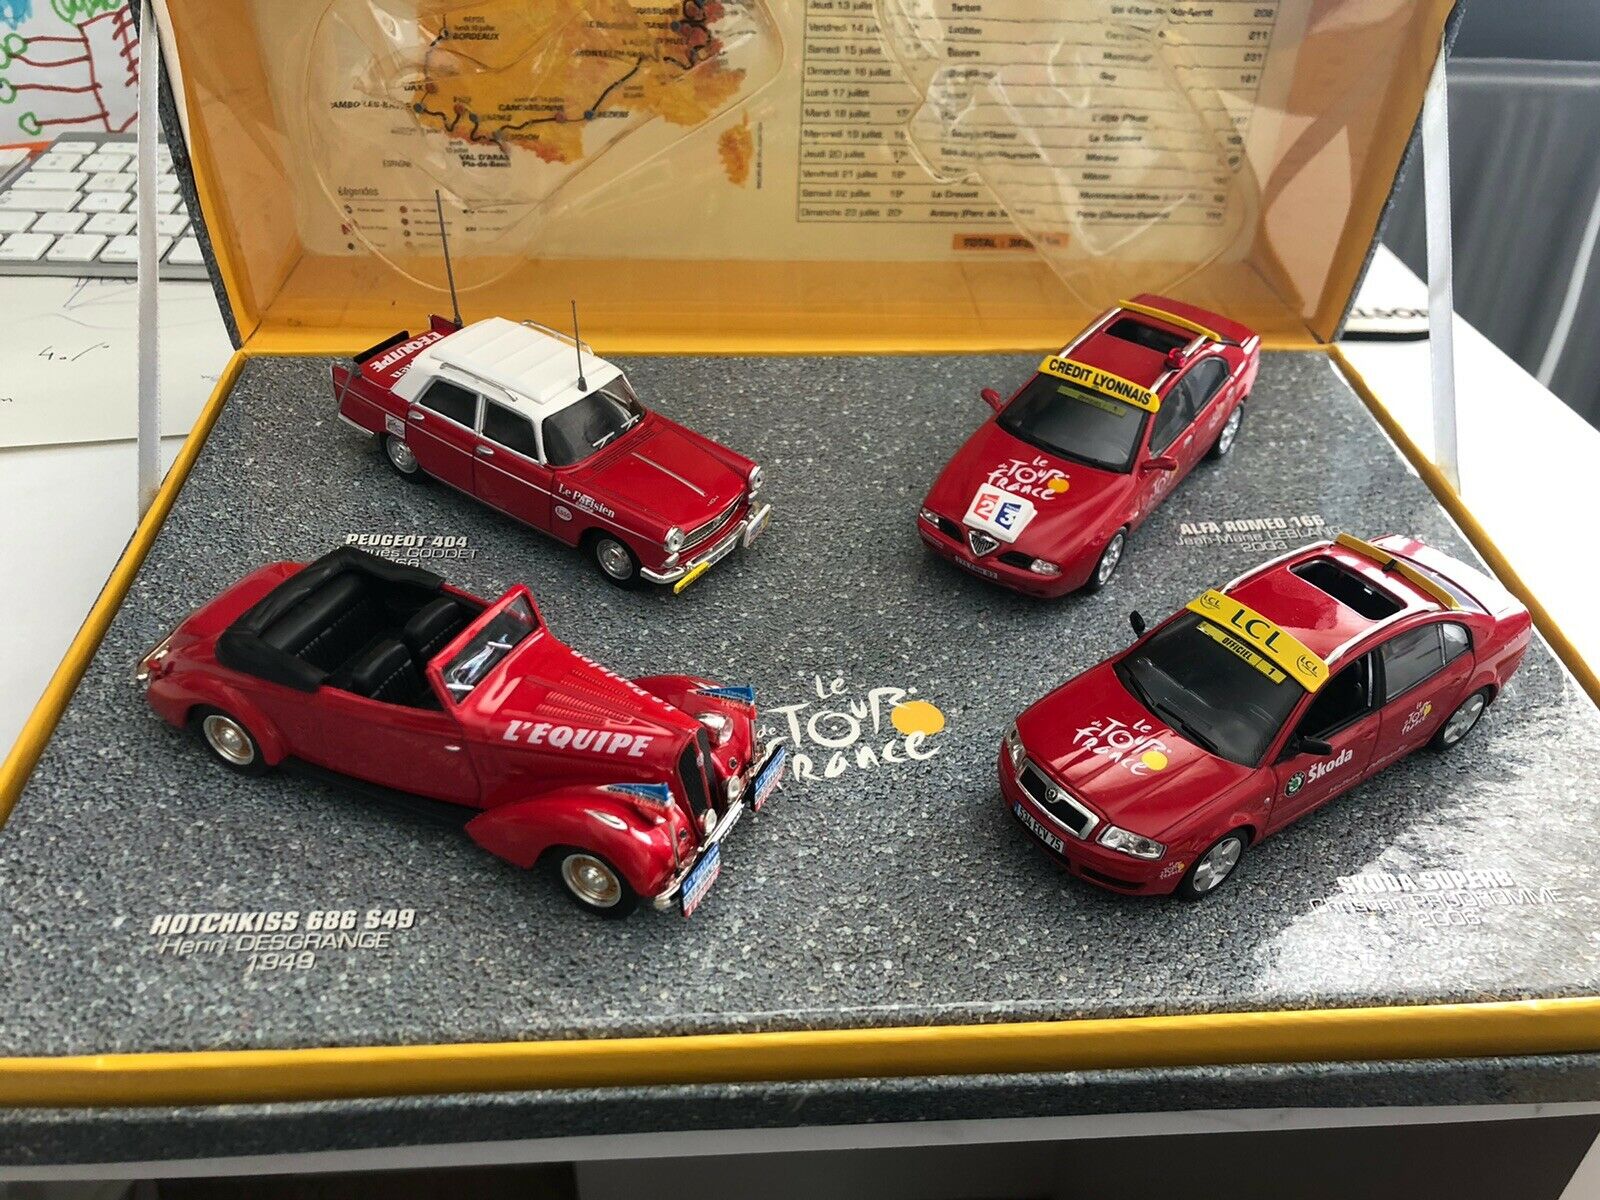 Tour France IPCT Commemorative Edition Bus Model Toy X1PC Xmas Gifts New In Box